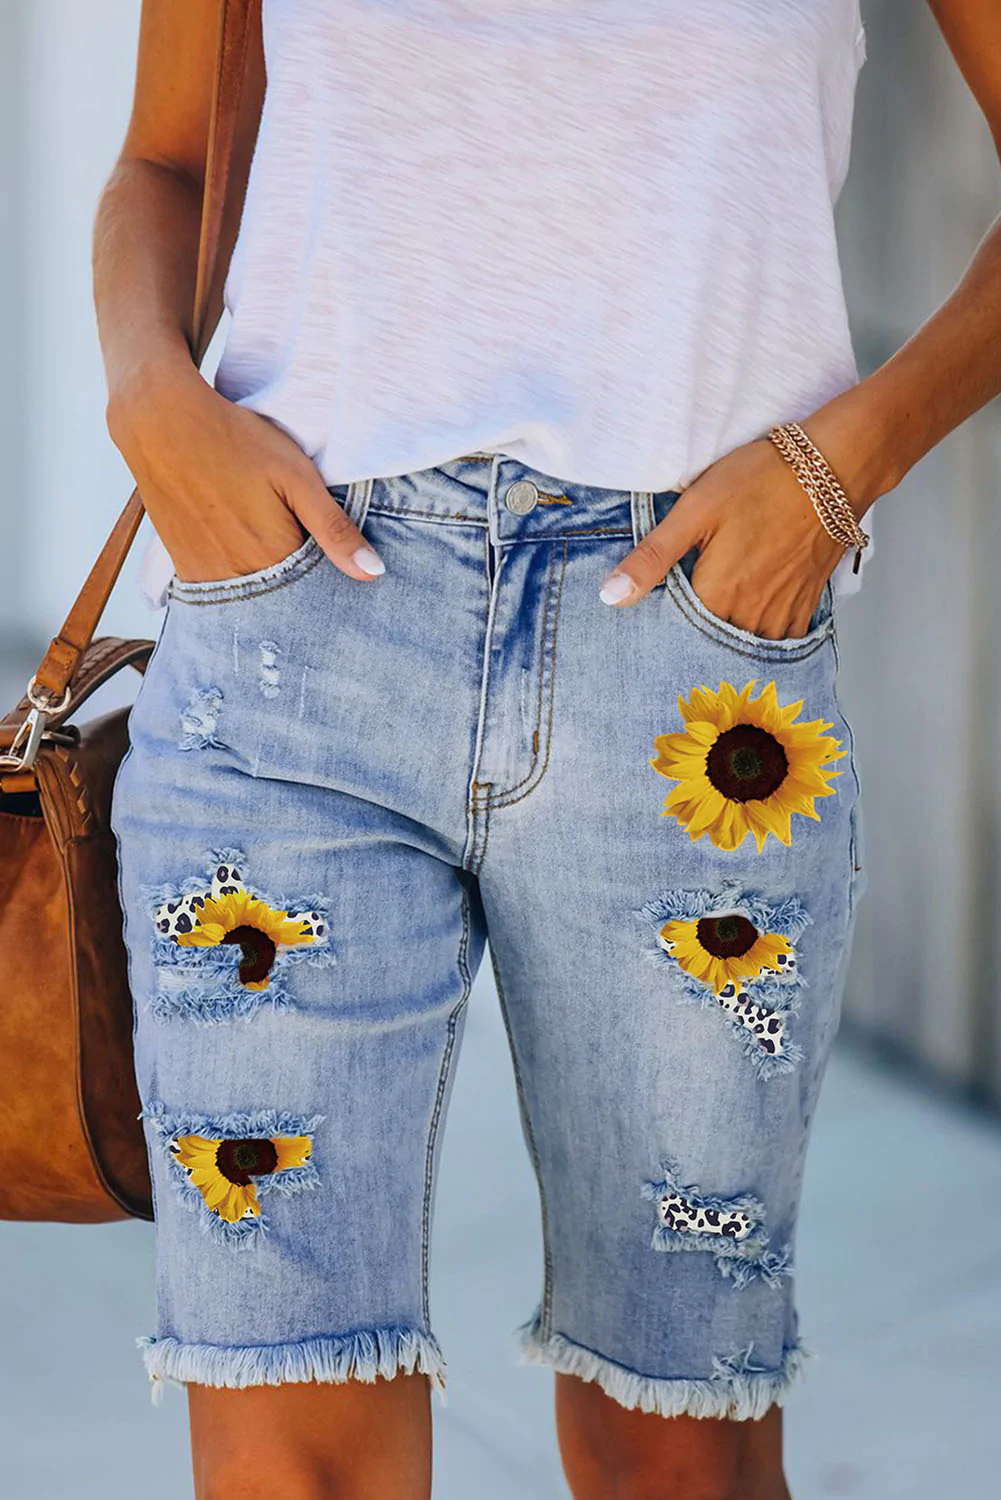 Sunshine Fashion For Chic Women With Sunflower Clothing